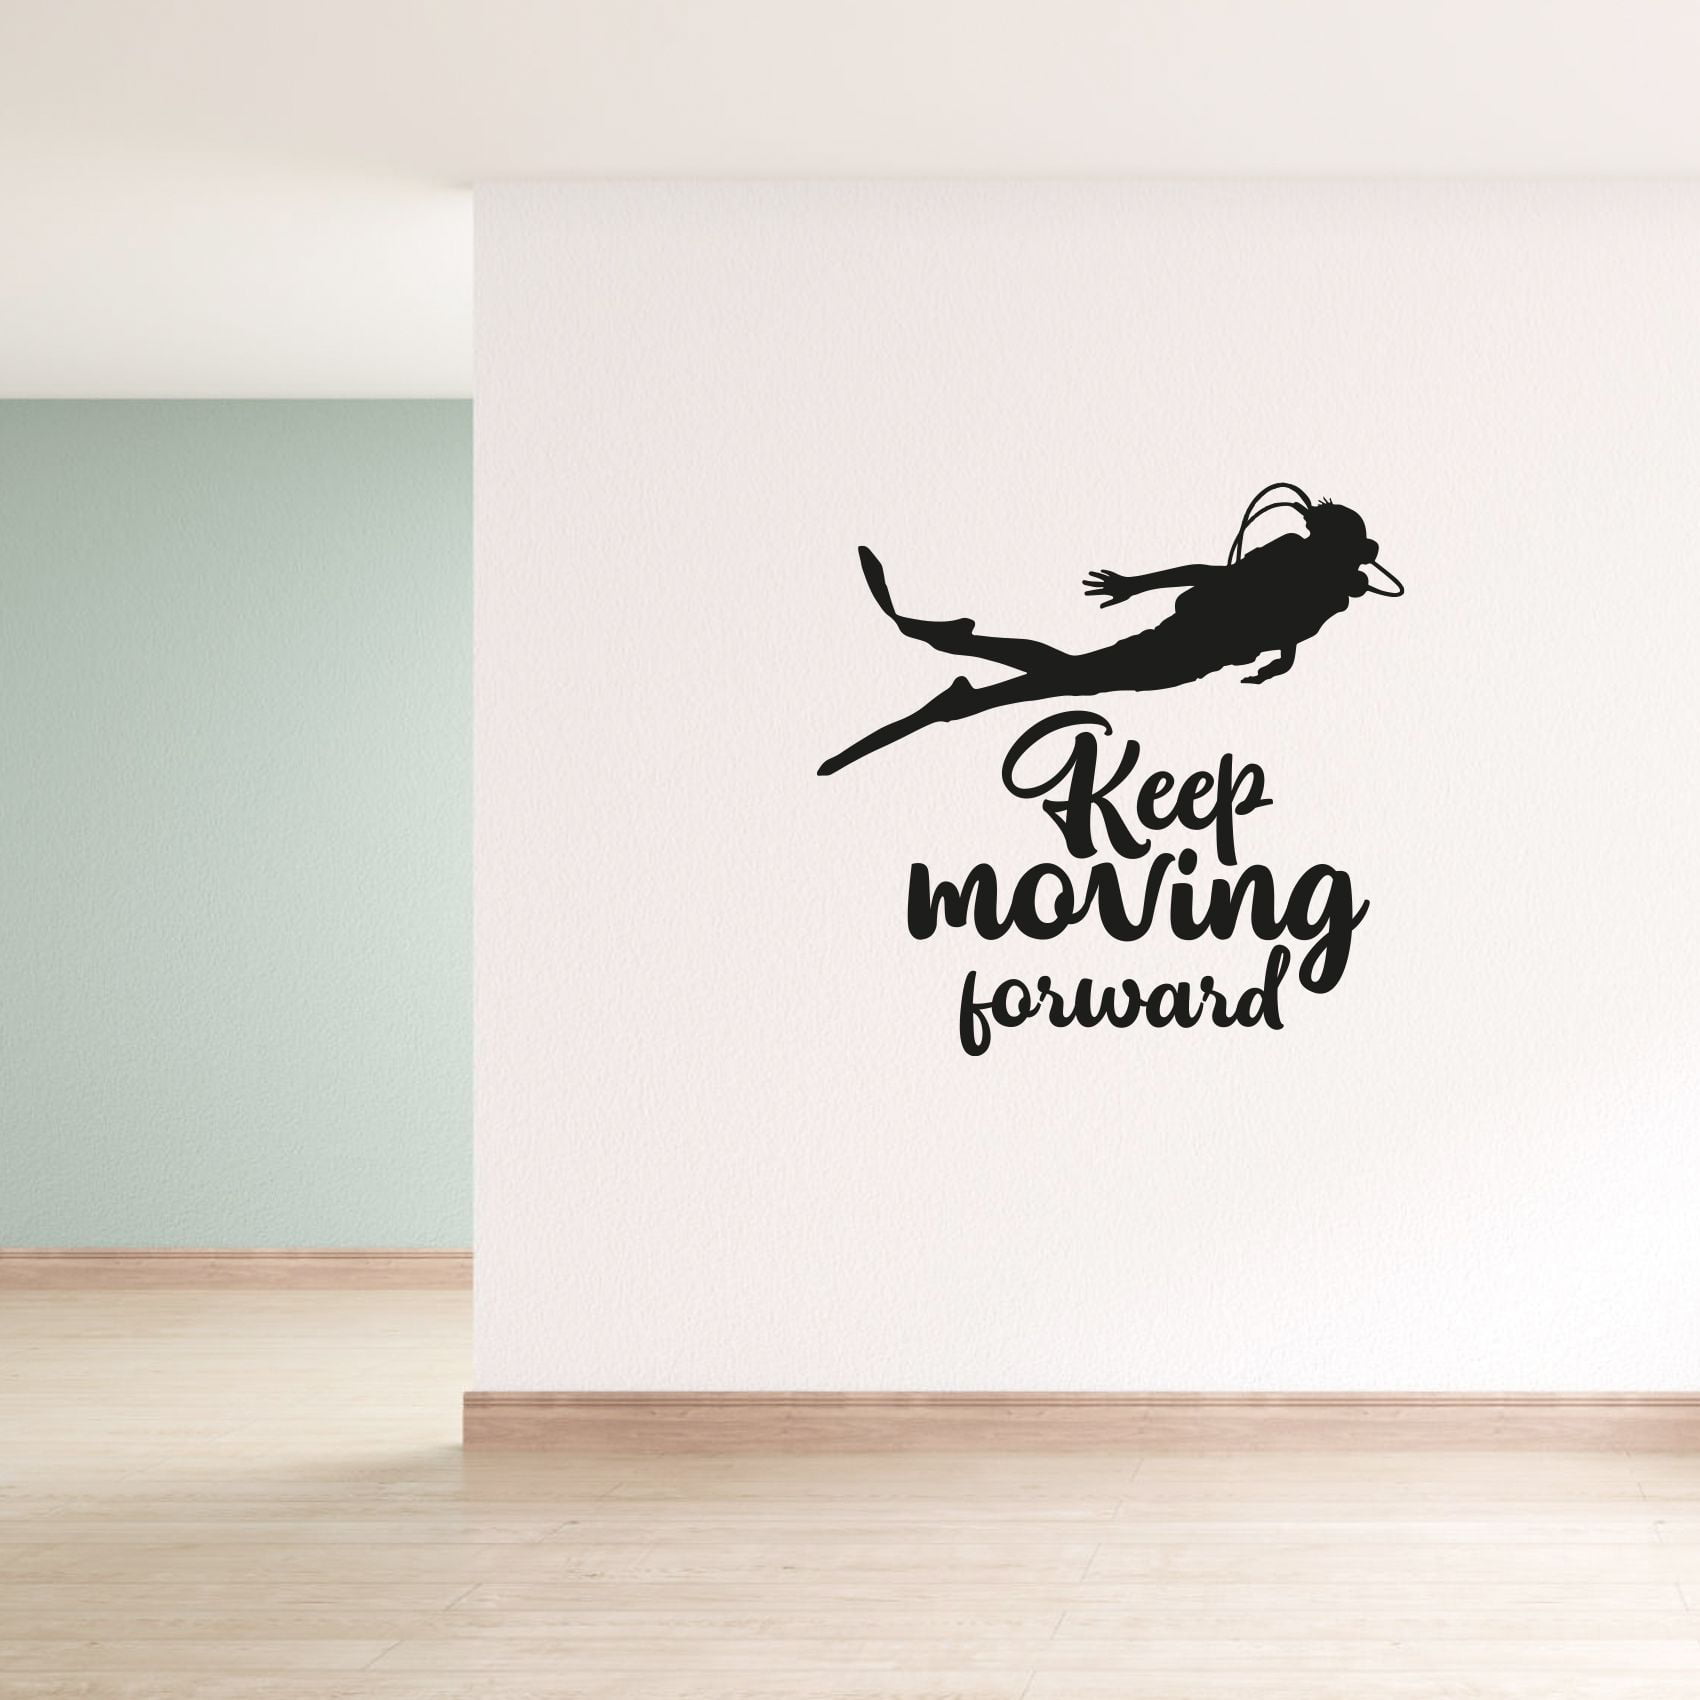 Details about   Sometimes The Hero Makes The Right Choice Wall Sticker Vinyl Art Decal Decor 